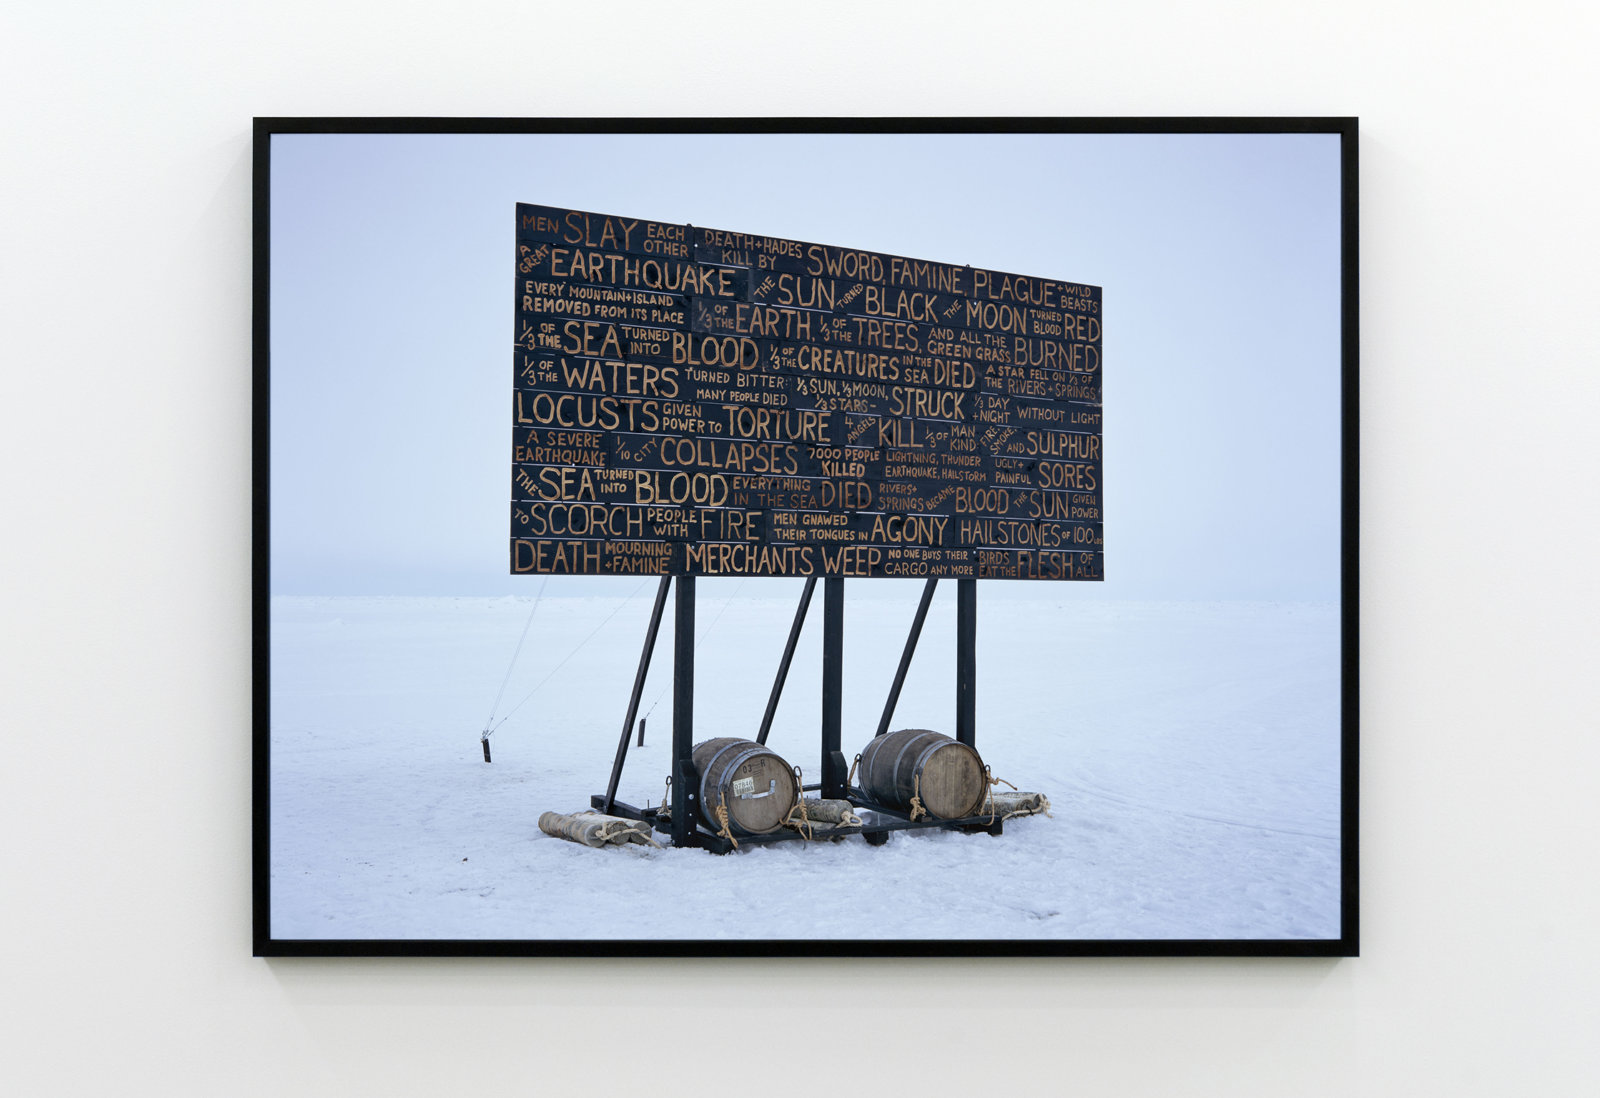 Kevin Schmidt, A Sign in the Northwest Passage (Museum Photograph), 2010, c-print, cedar frame, 64 x 49 in. (163 x 124 cm)